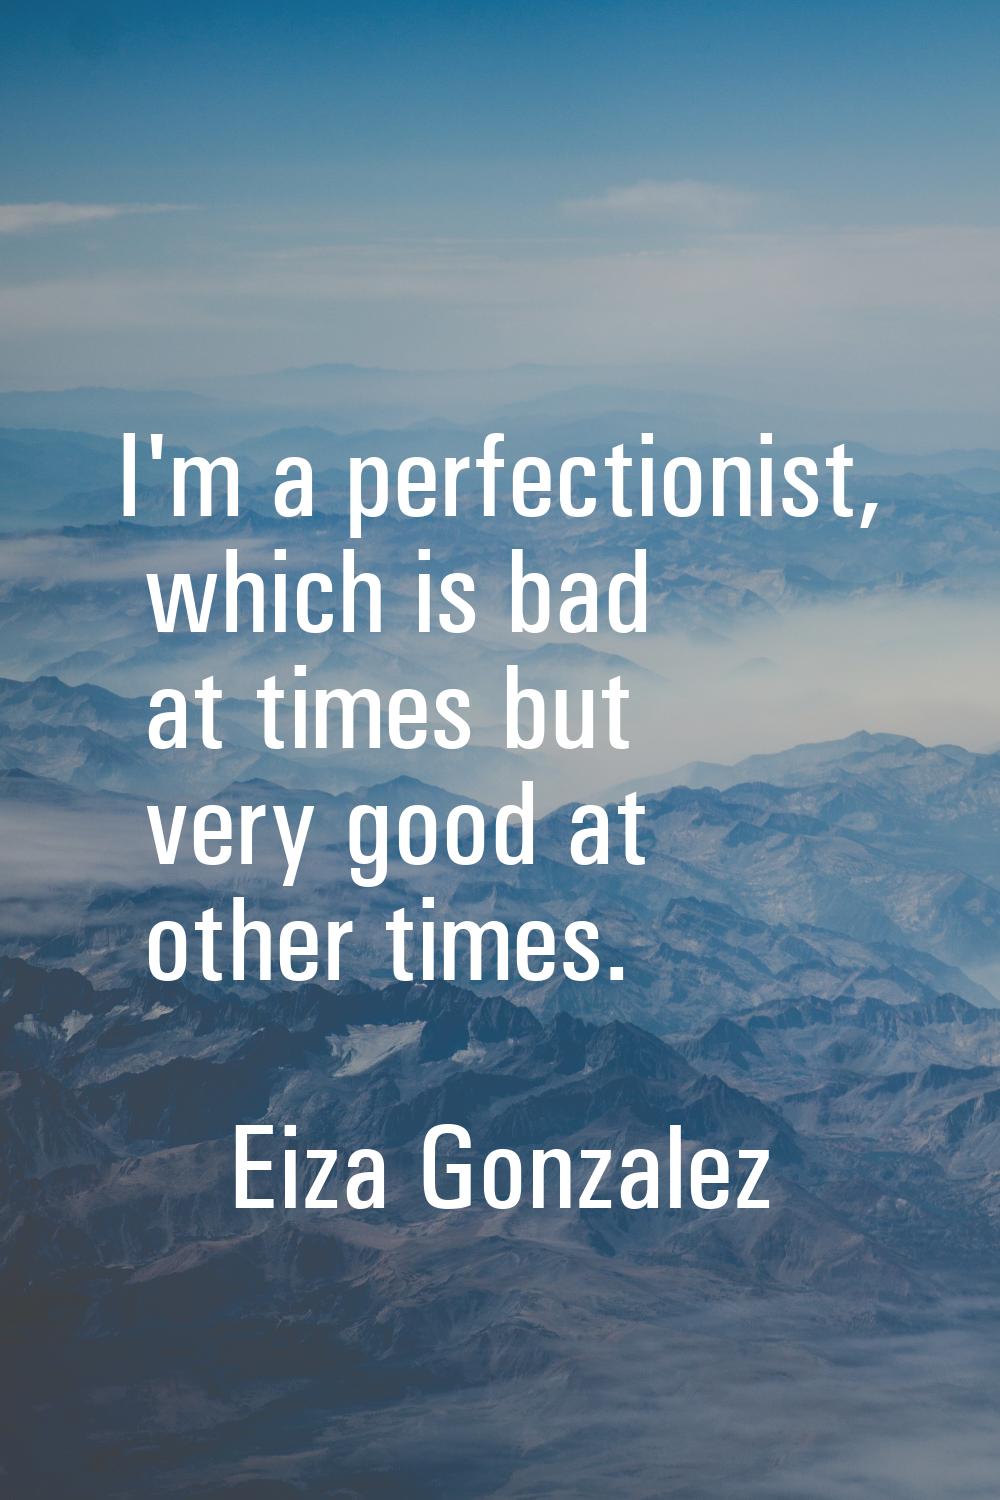 I'm a perfectionist, which is bad at times but very good at other times.